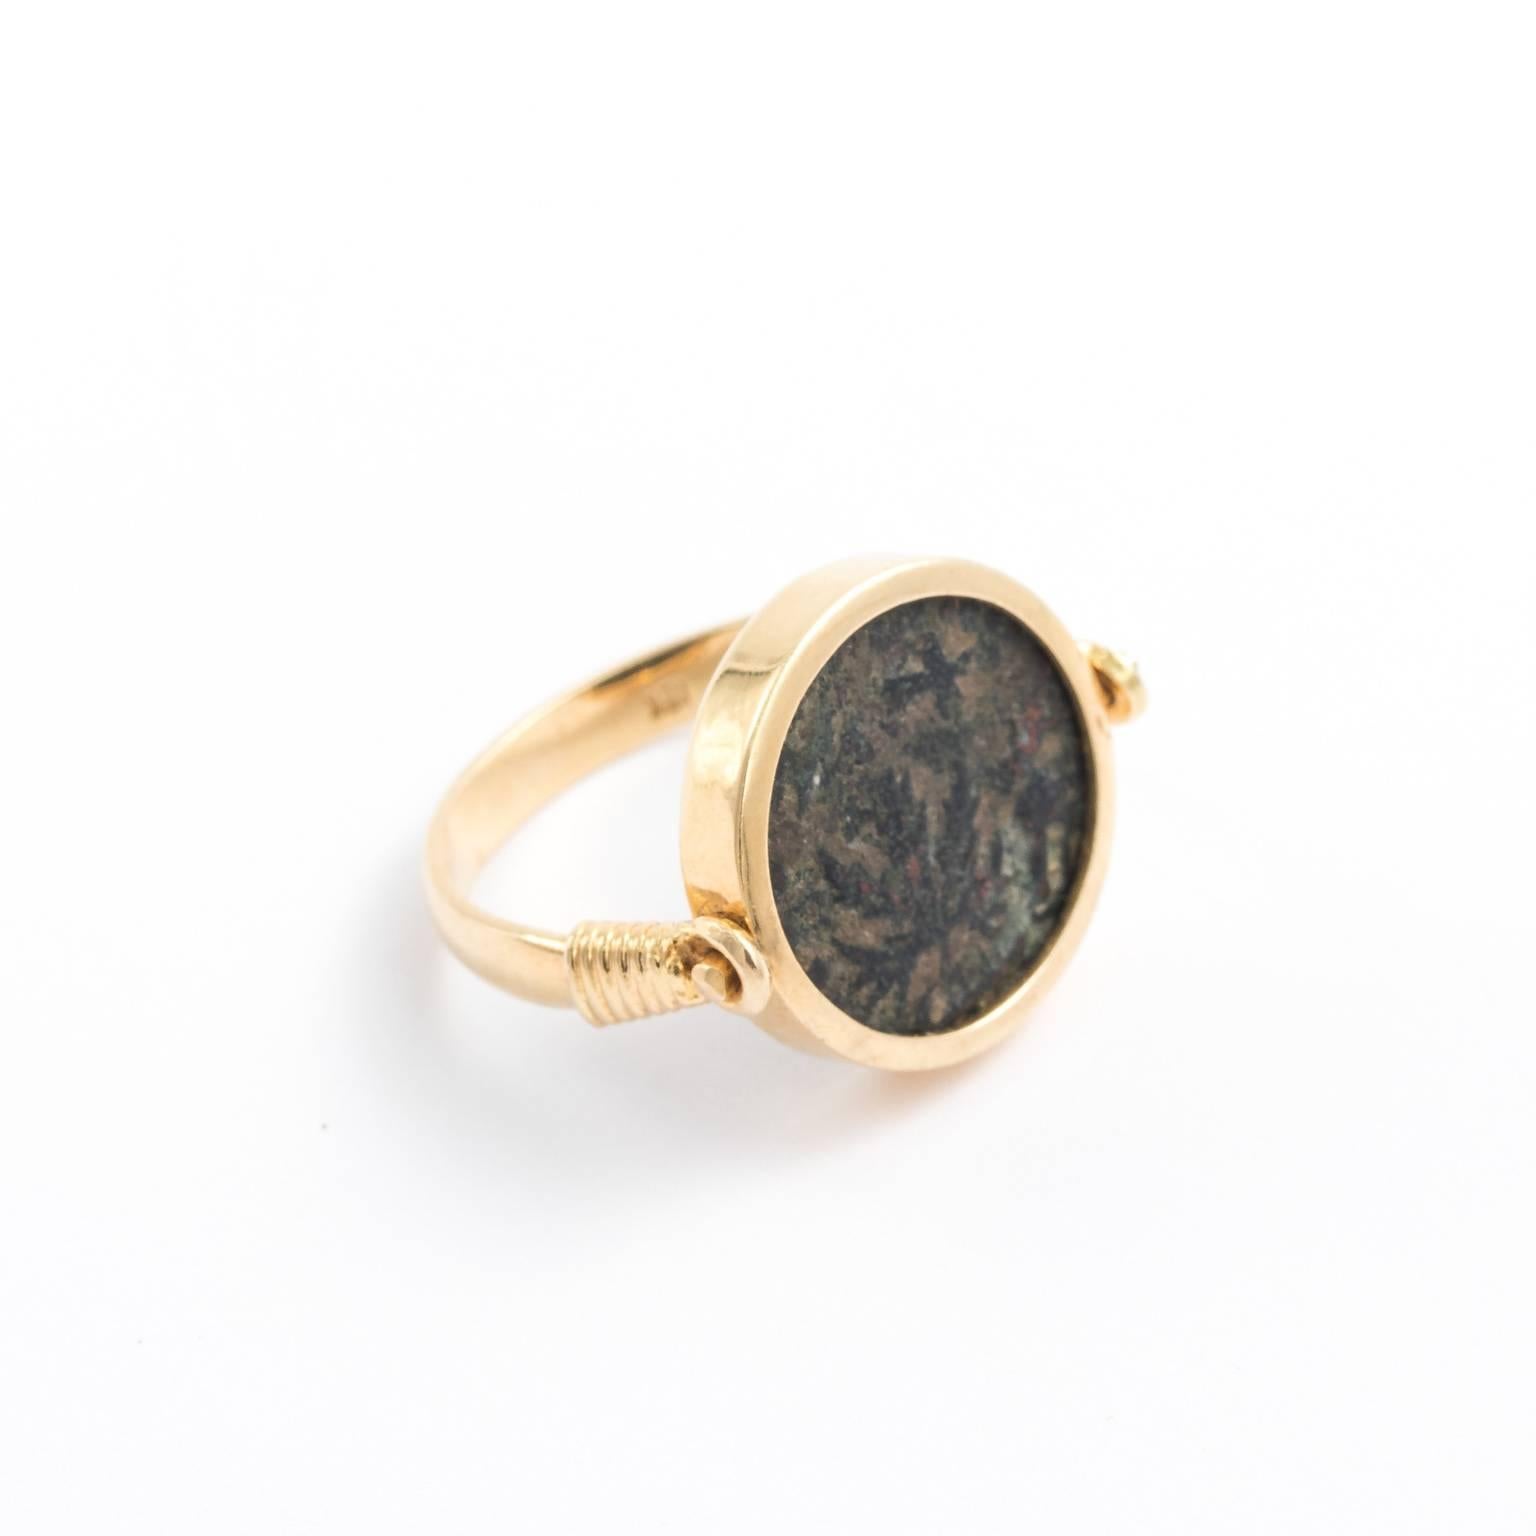 Late Victorian coin ring that flips to show two different designs on an ancient Roman coin, set in 18kt gold. Commonly called 